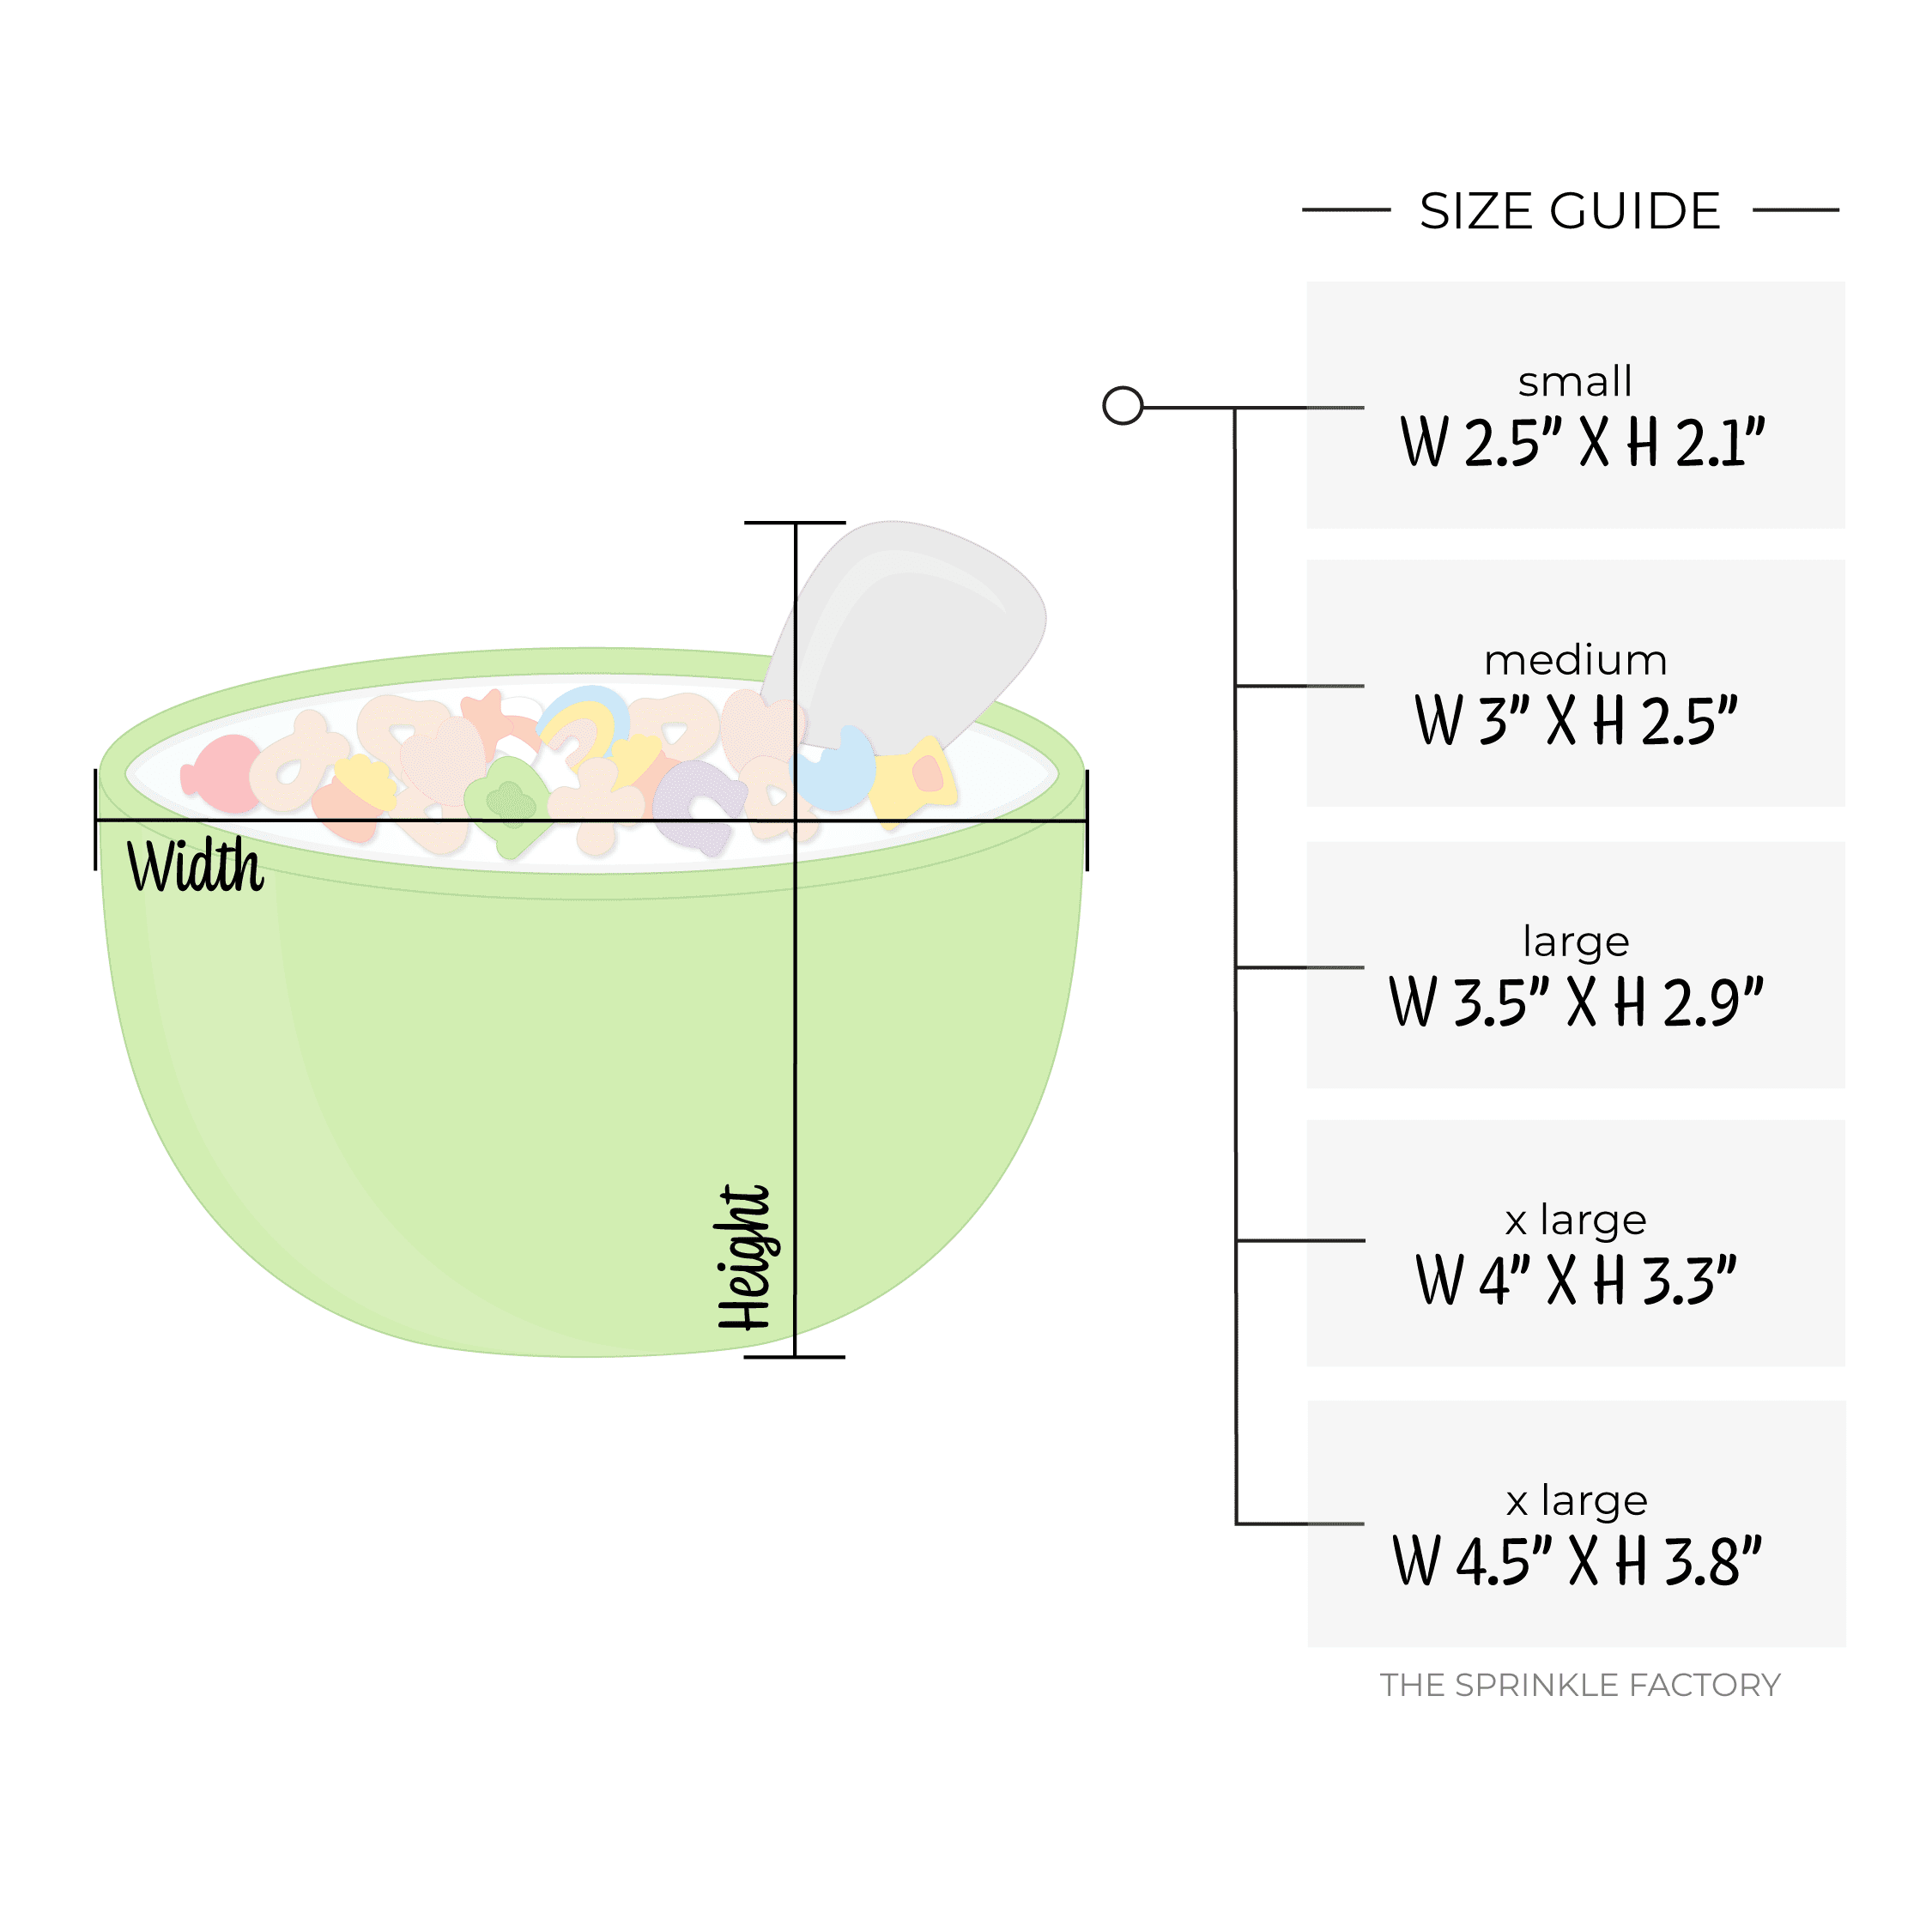 Clipart of a bright green bowl of cereal with milk and multi coloured marshmallow charm floating in it with a grey spoon handle sticking out of the milk to the right with size guide next to it.